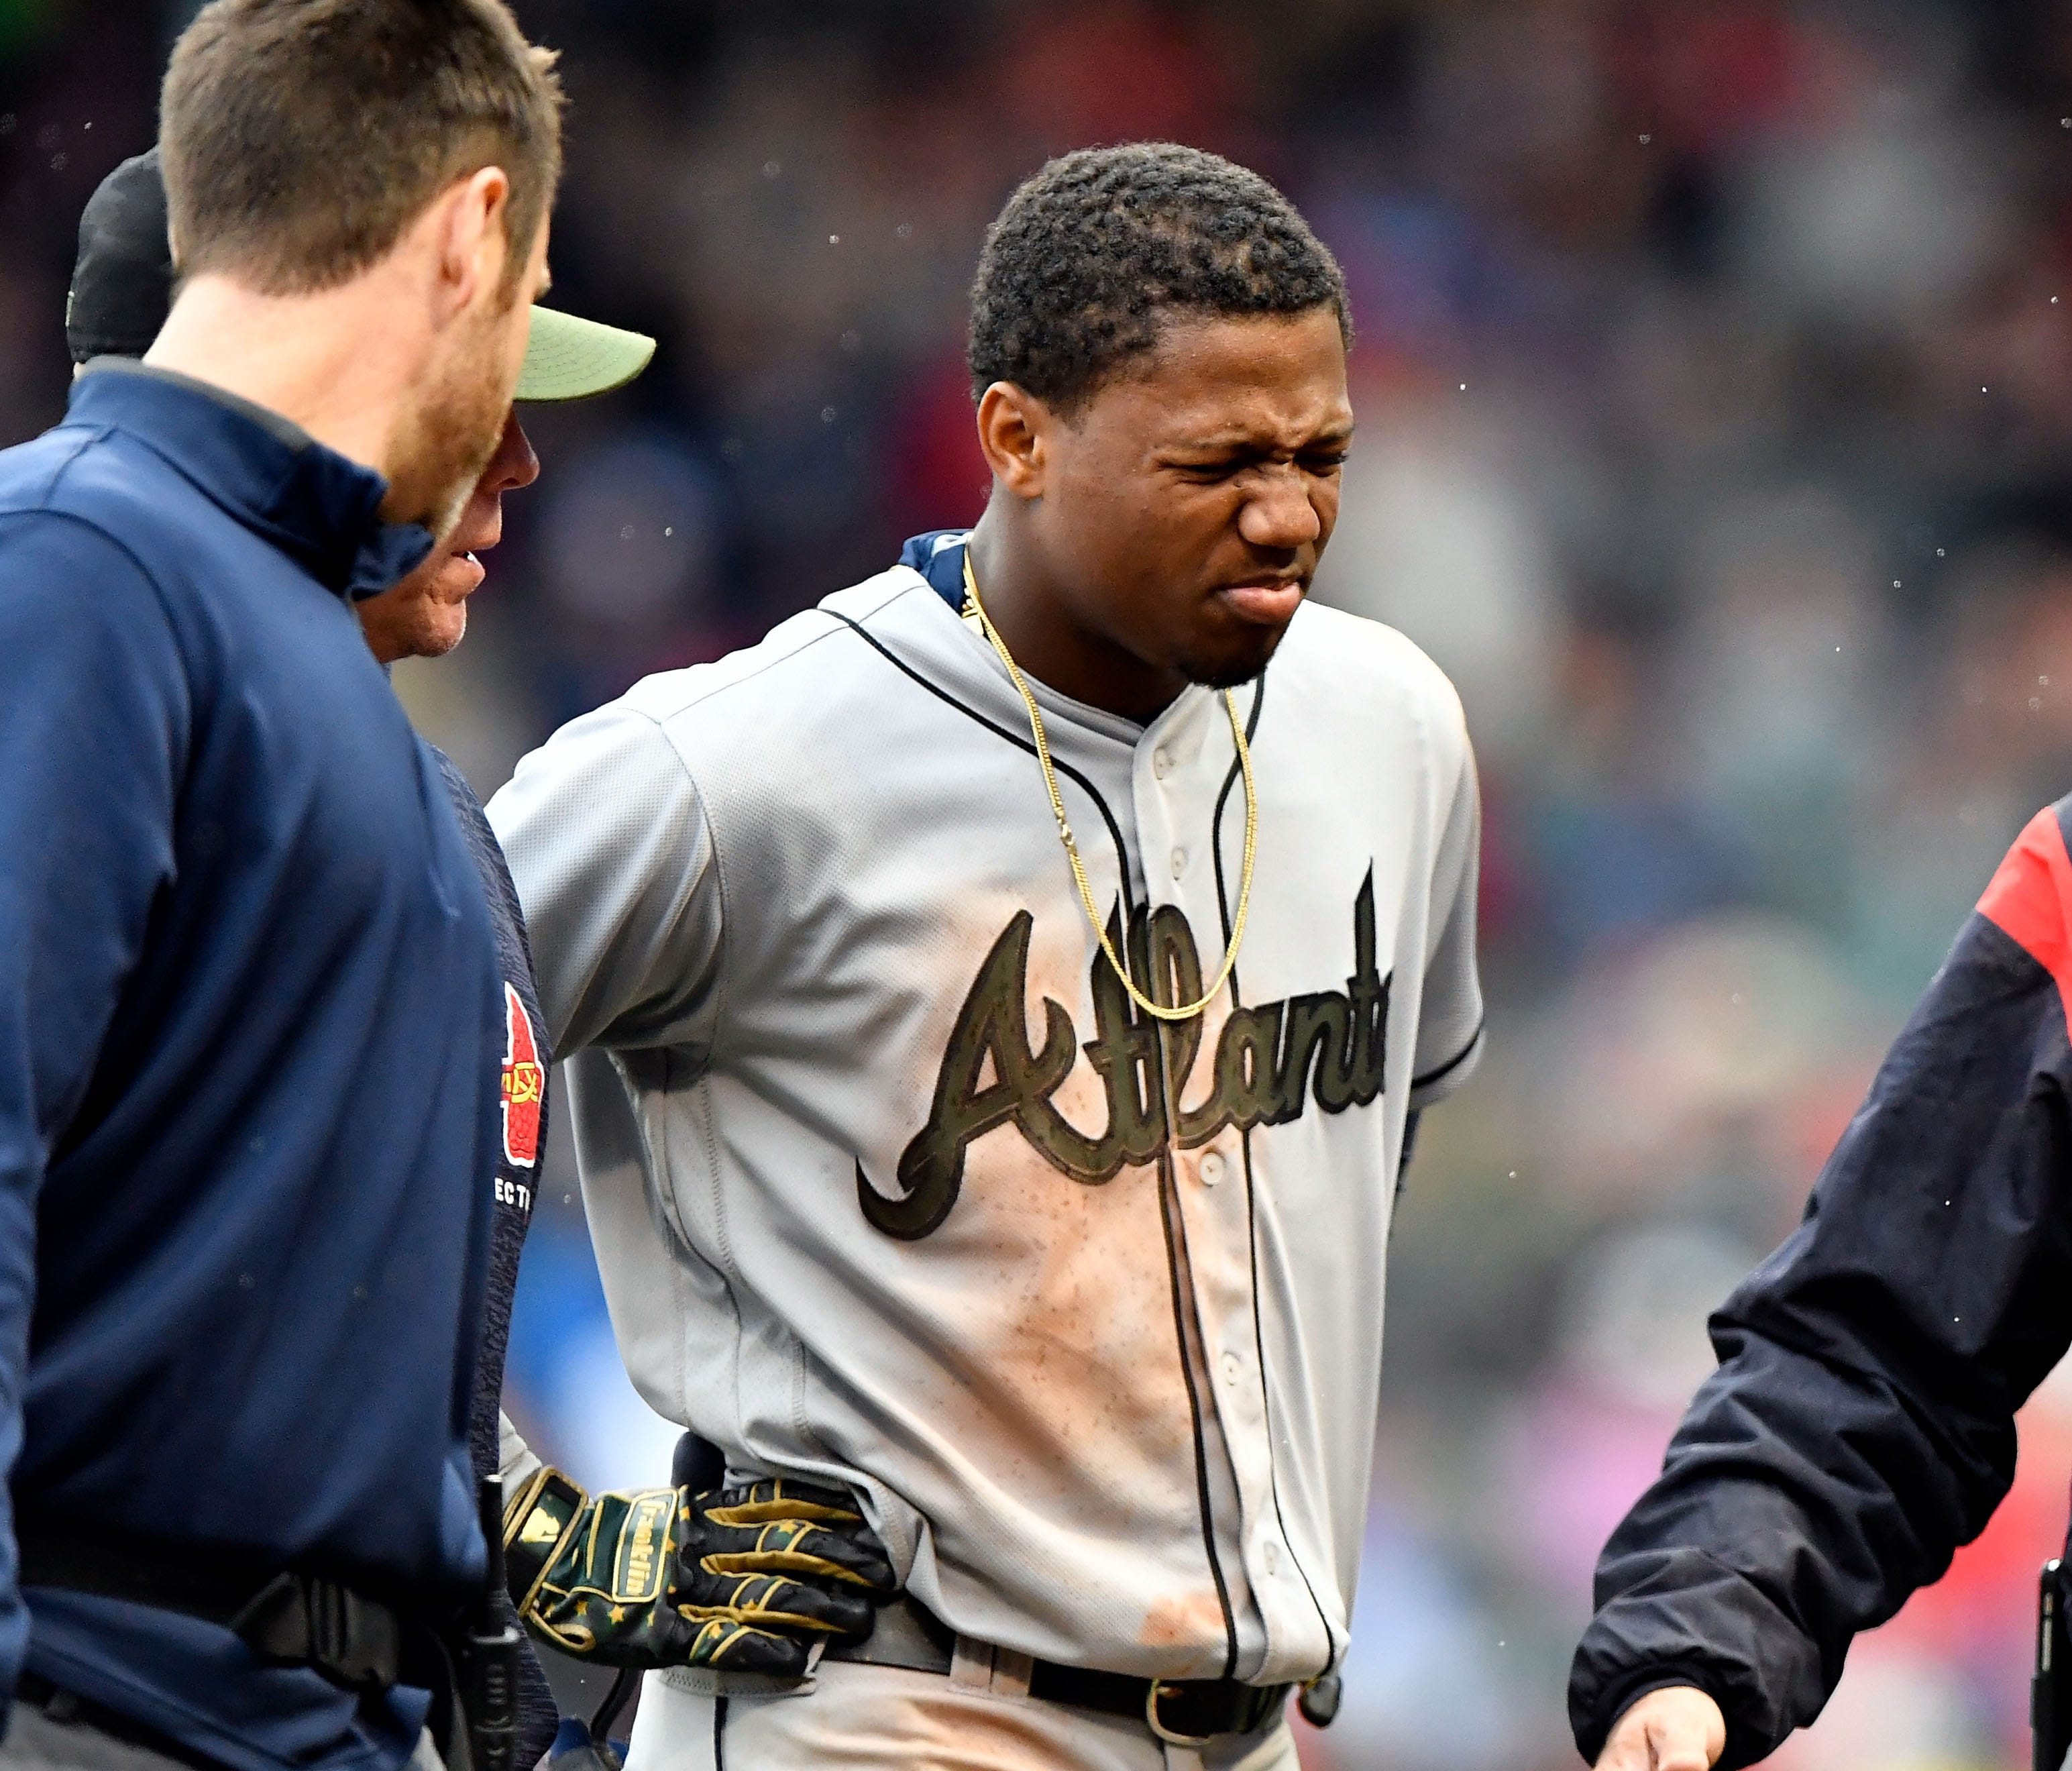 Atlanta Braves outfielder Ronald Acuna Jr. is helped off of the field after injuring his lower leg during the seventh inning Sunday against the Boston Red Sox.